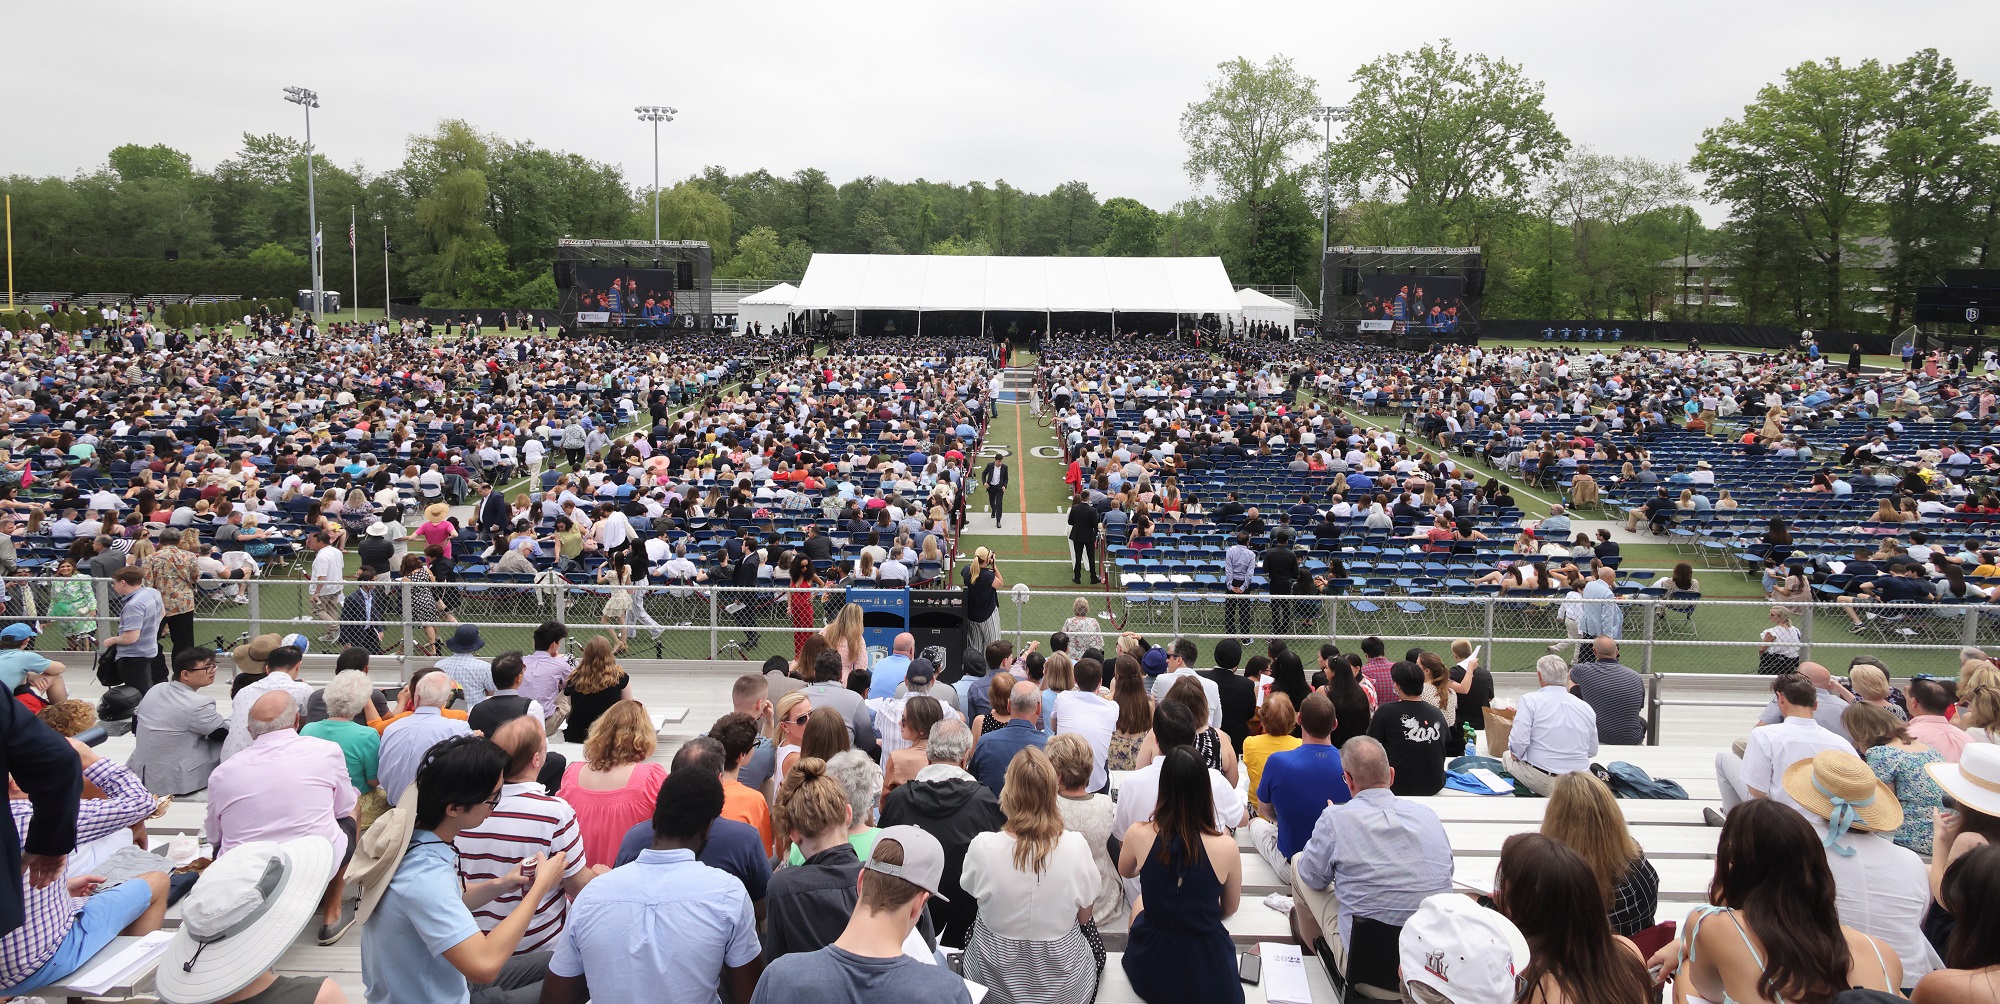 The commencement crowd